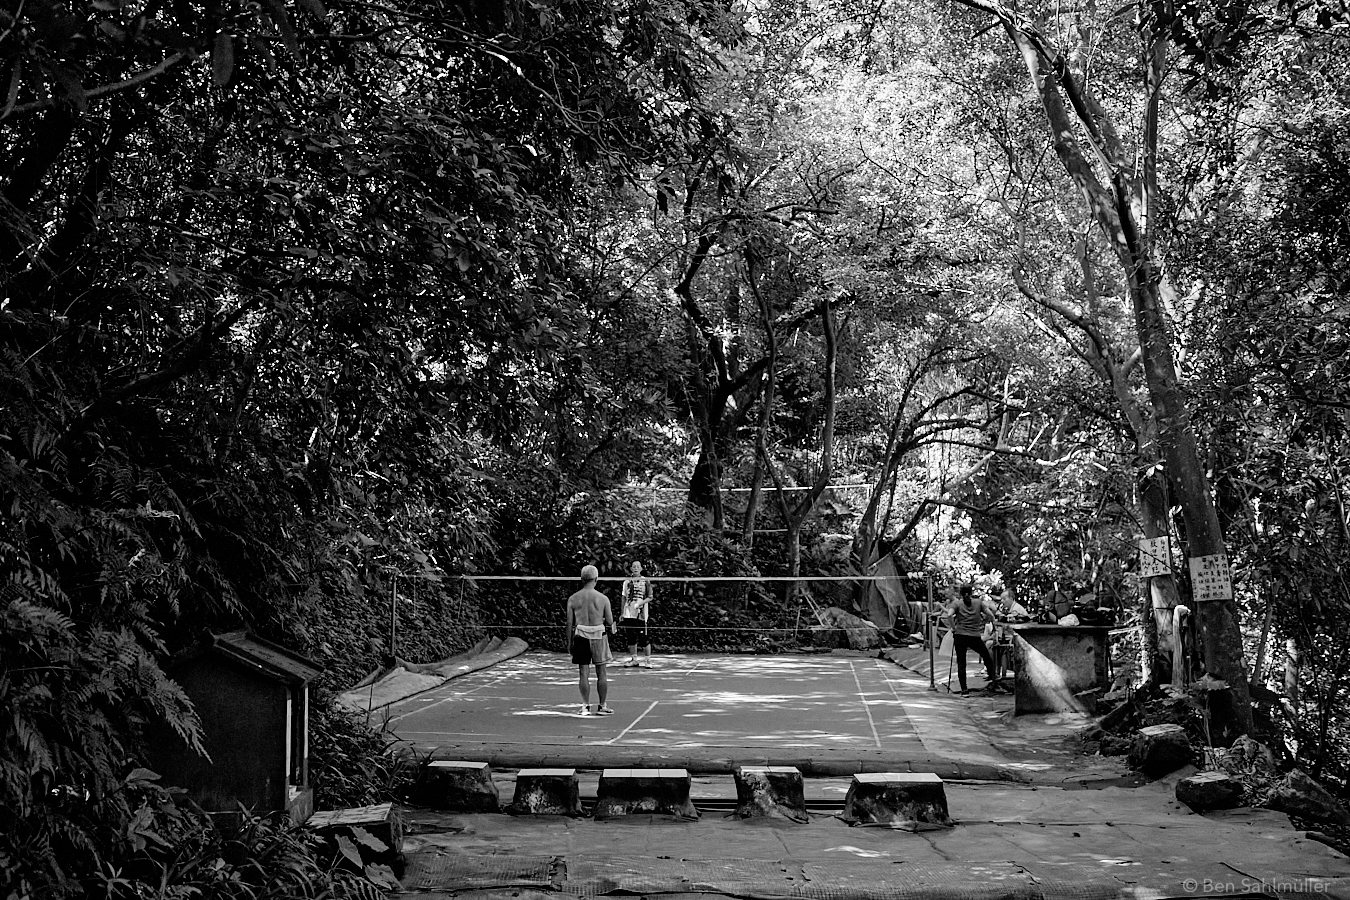 A group of older Taiwanese playing badminton. Their court is surrounded by a dense jungle forest of trees. Some of them are resting and chatting at the side. There is a small shrine to the left of the court.